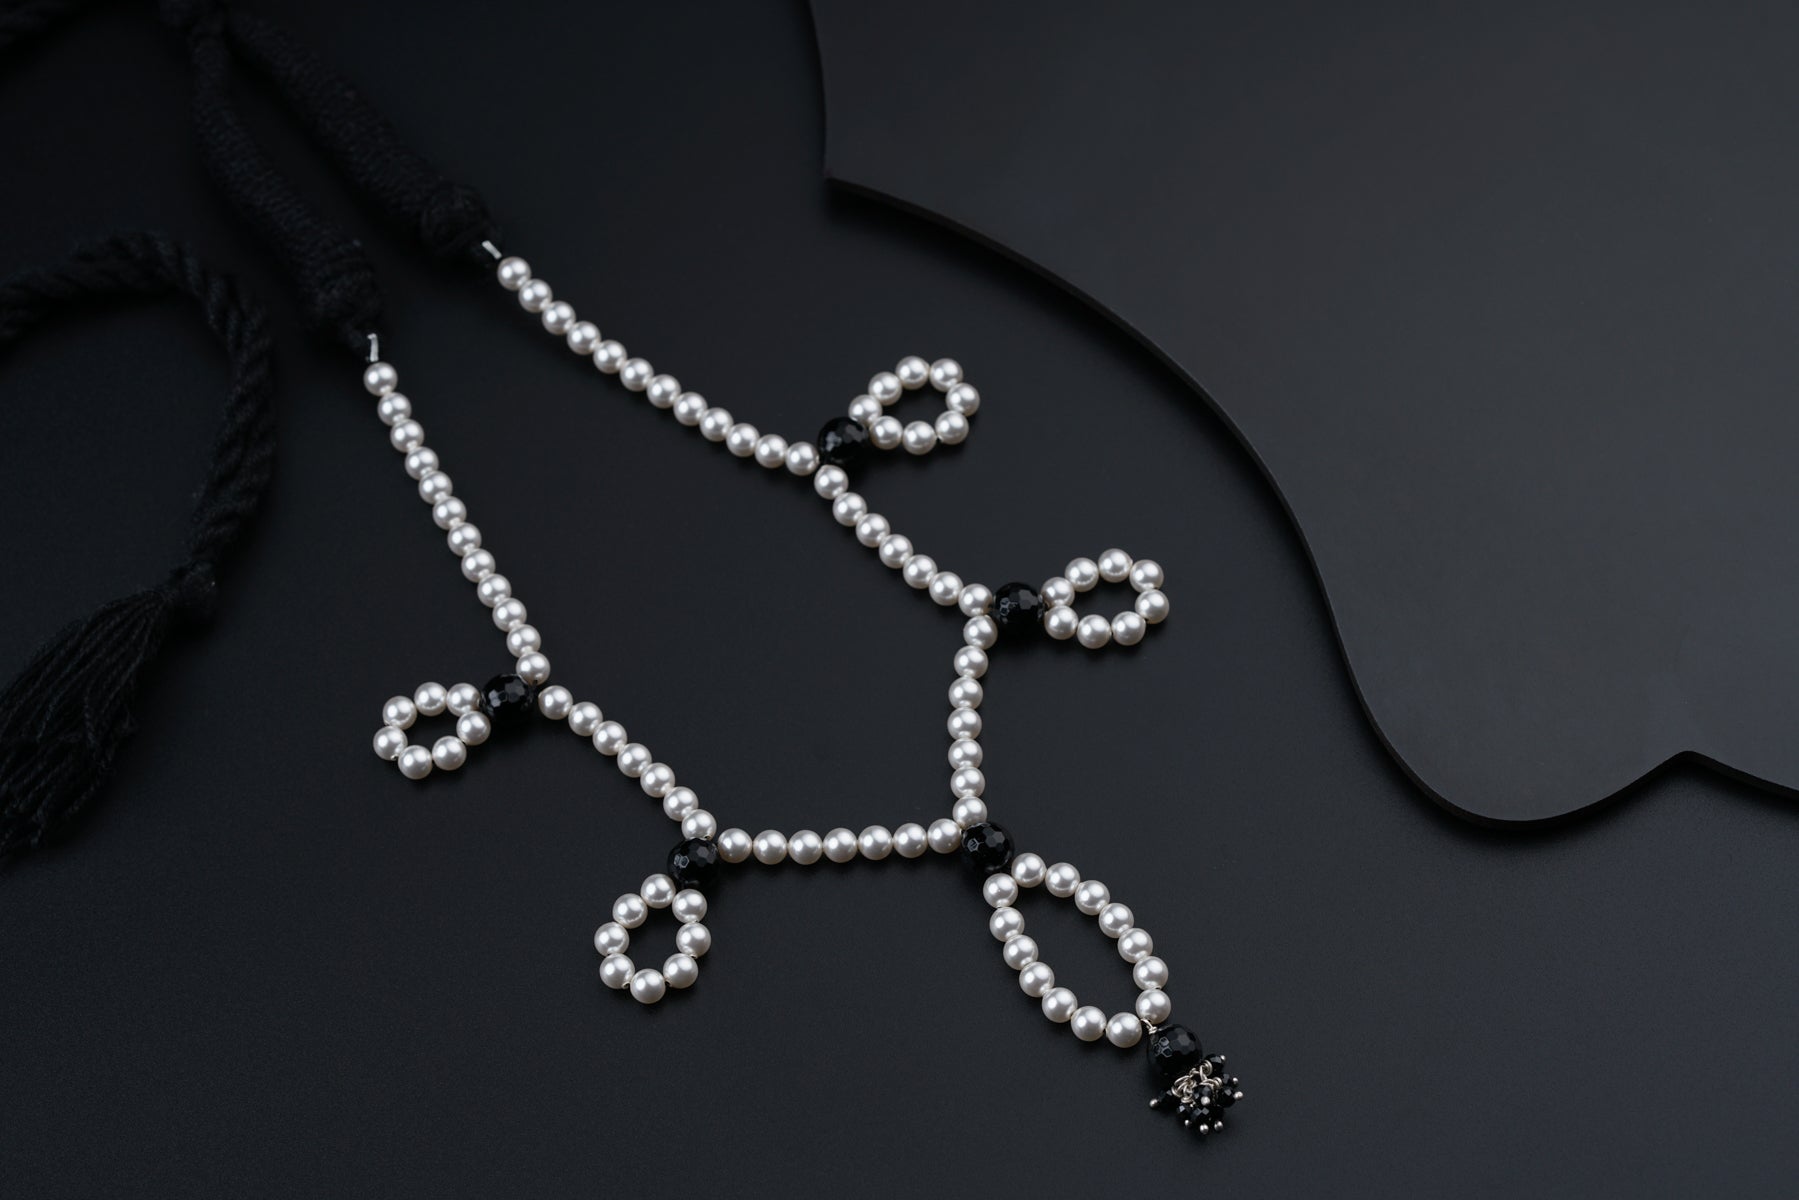 Yin Yang: Silver Necklace with Black spinel and pearls